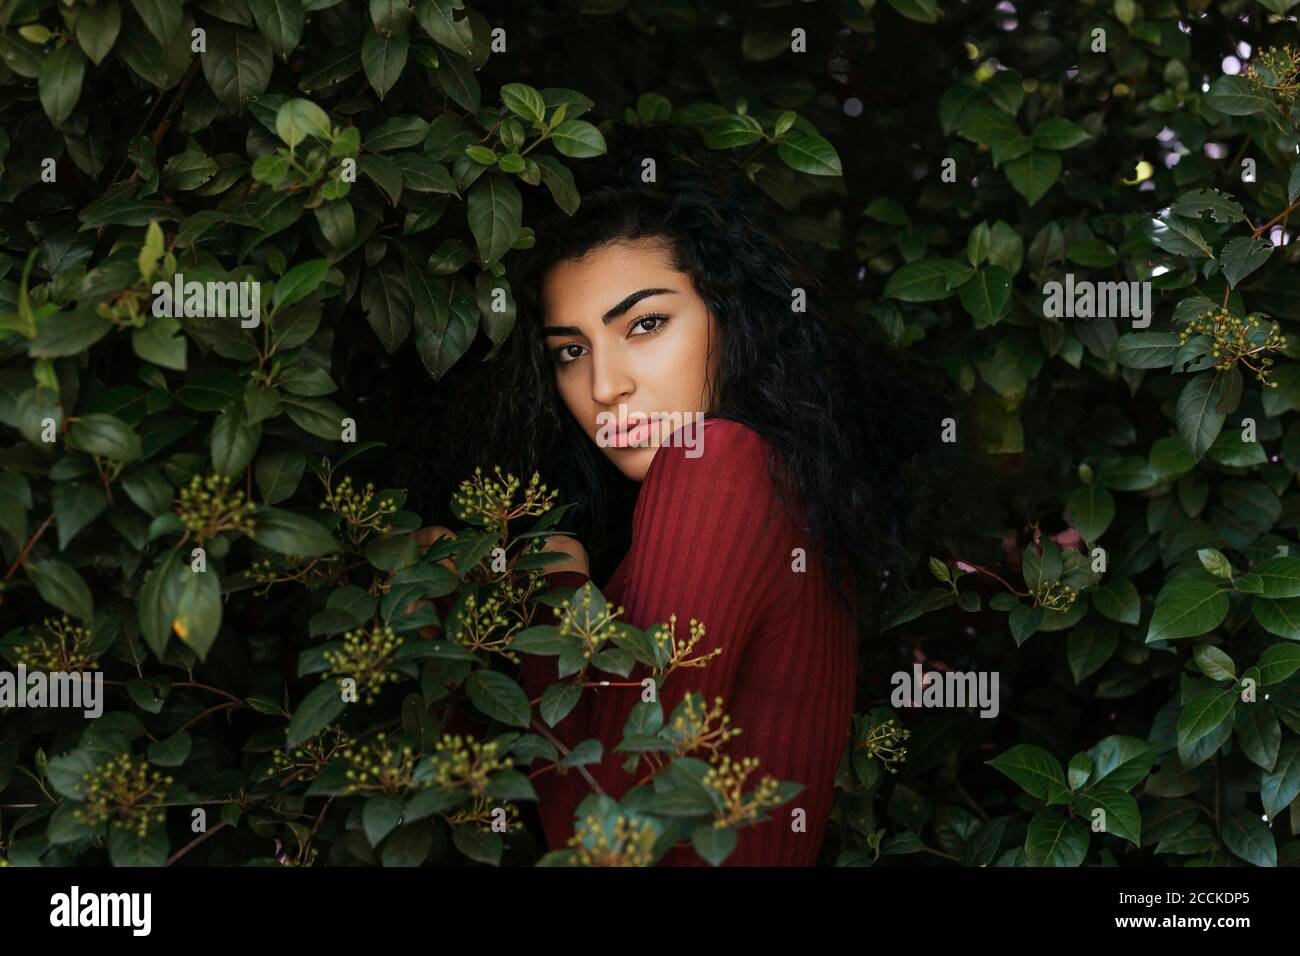 Portrait of young black-haired woman between leaves Stock Photo